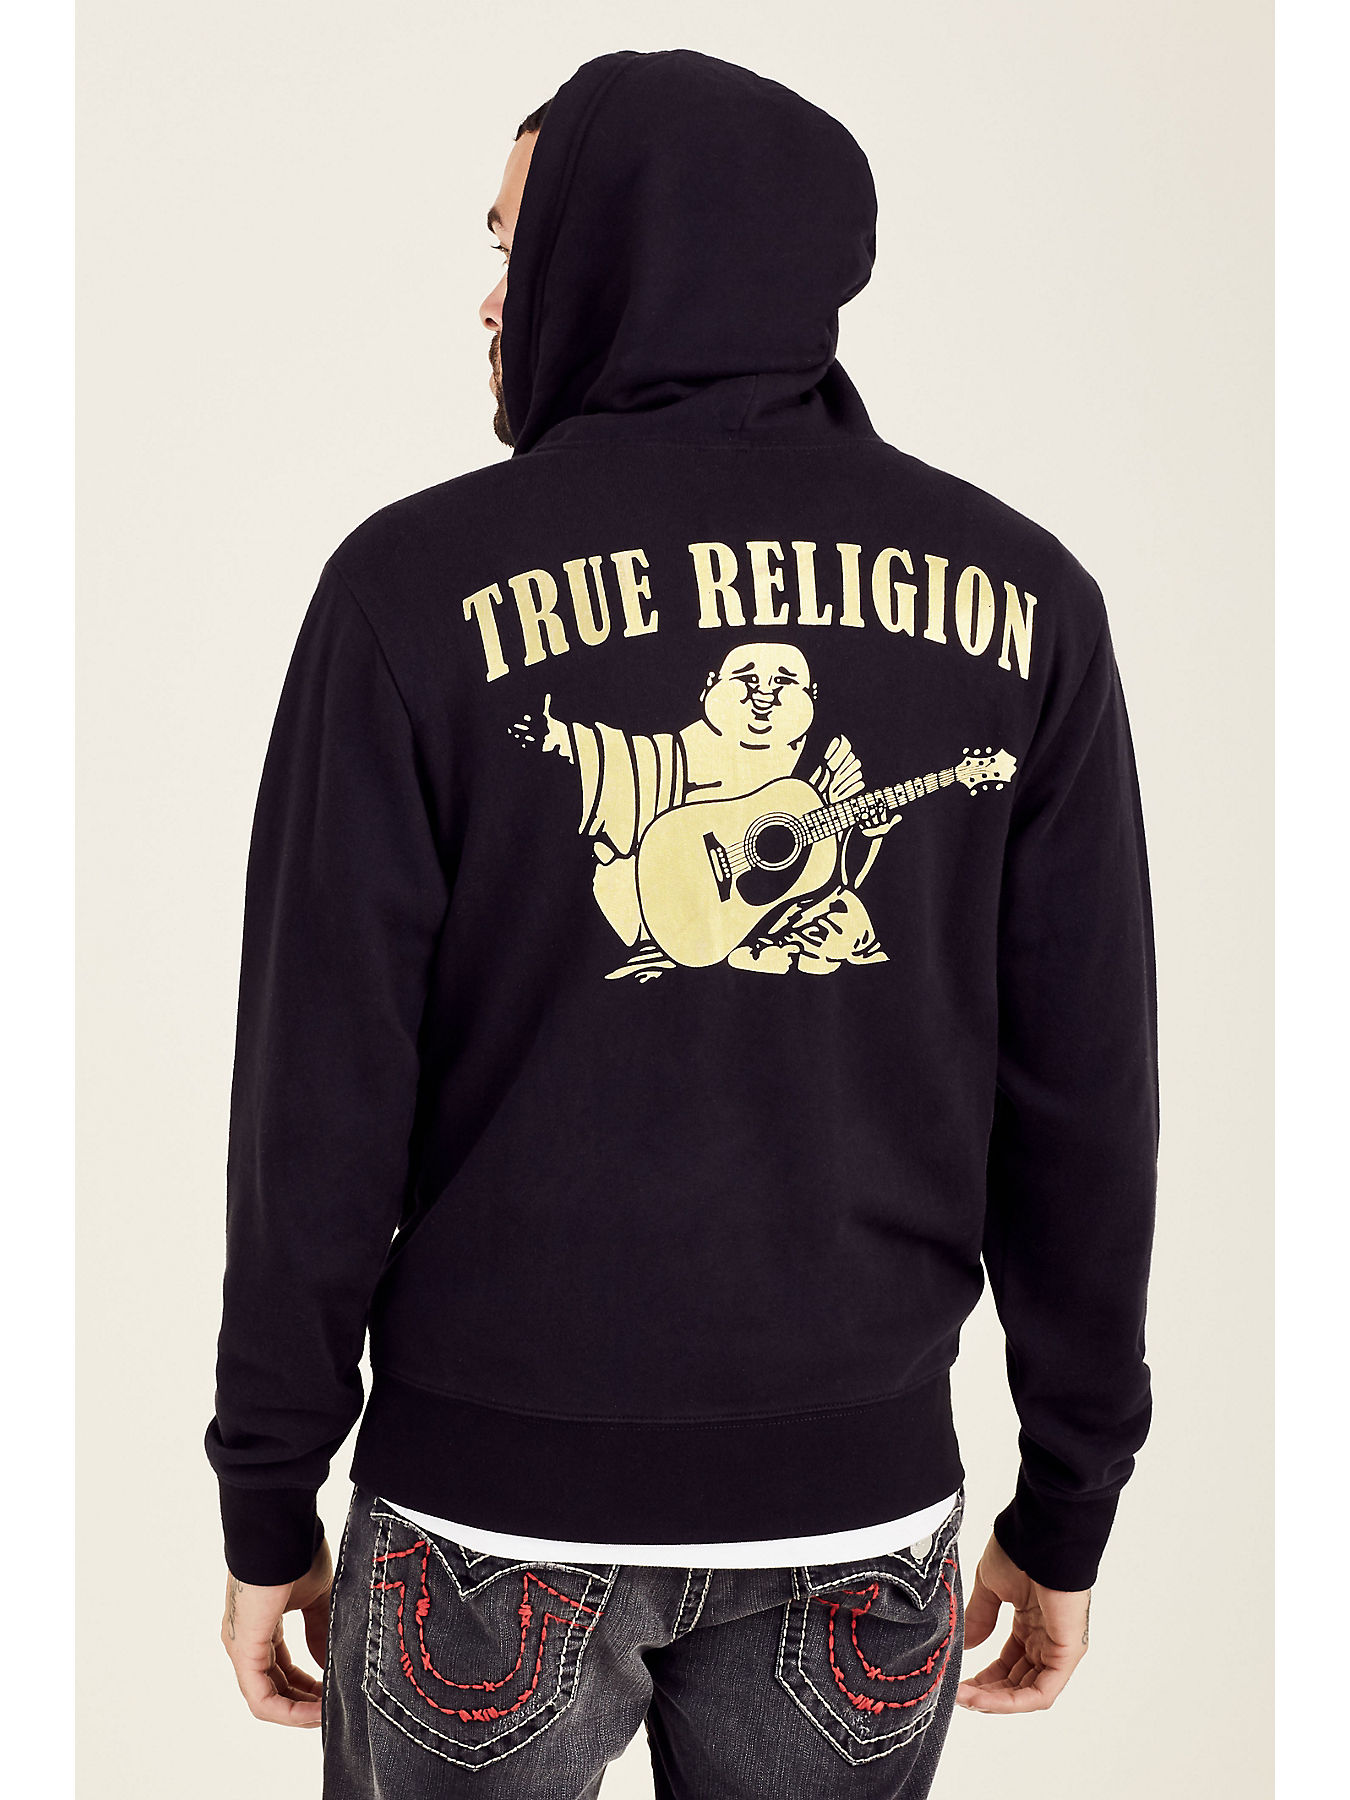 Why the True Religion Hoodie Is a Fashion Statement We Cant Ignore